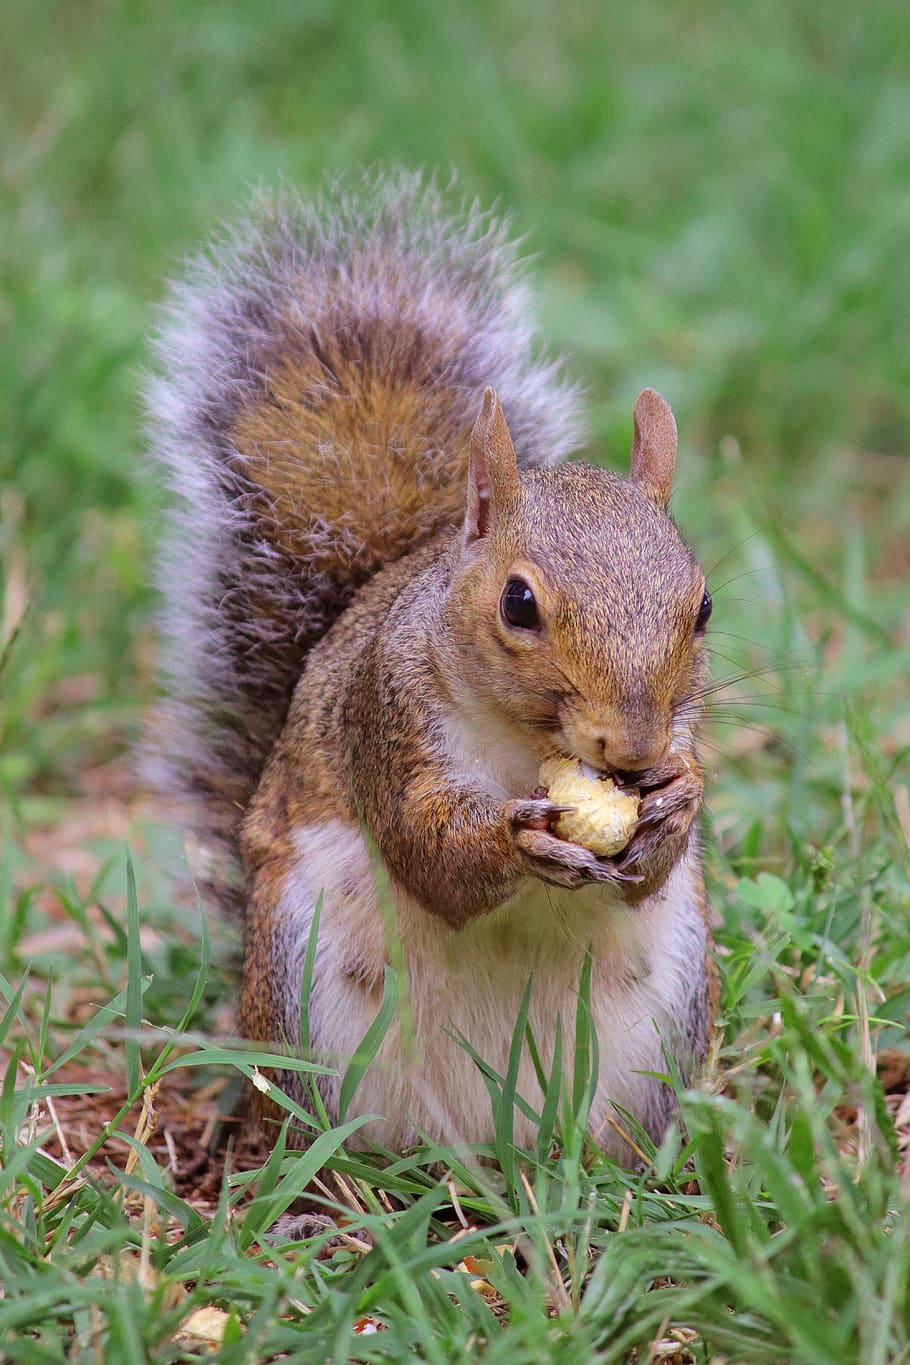 squirrel, nature, animal, rodent, cute, hairy, eat, outdoor, prato, animal wildlife